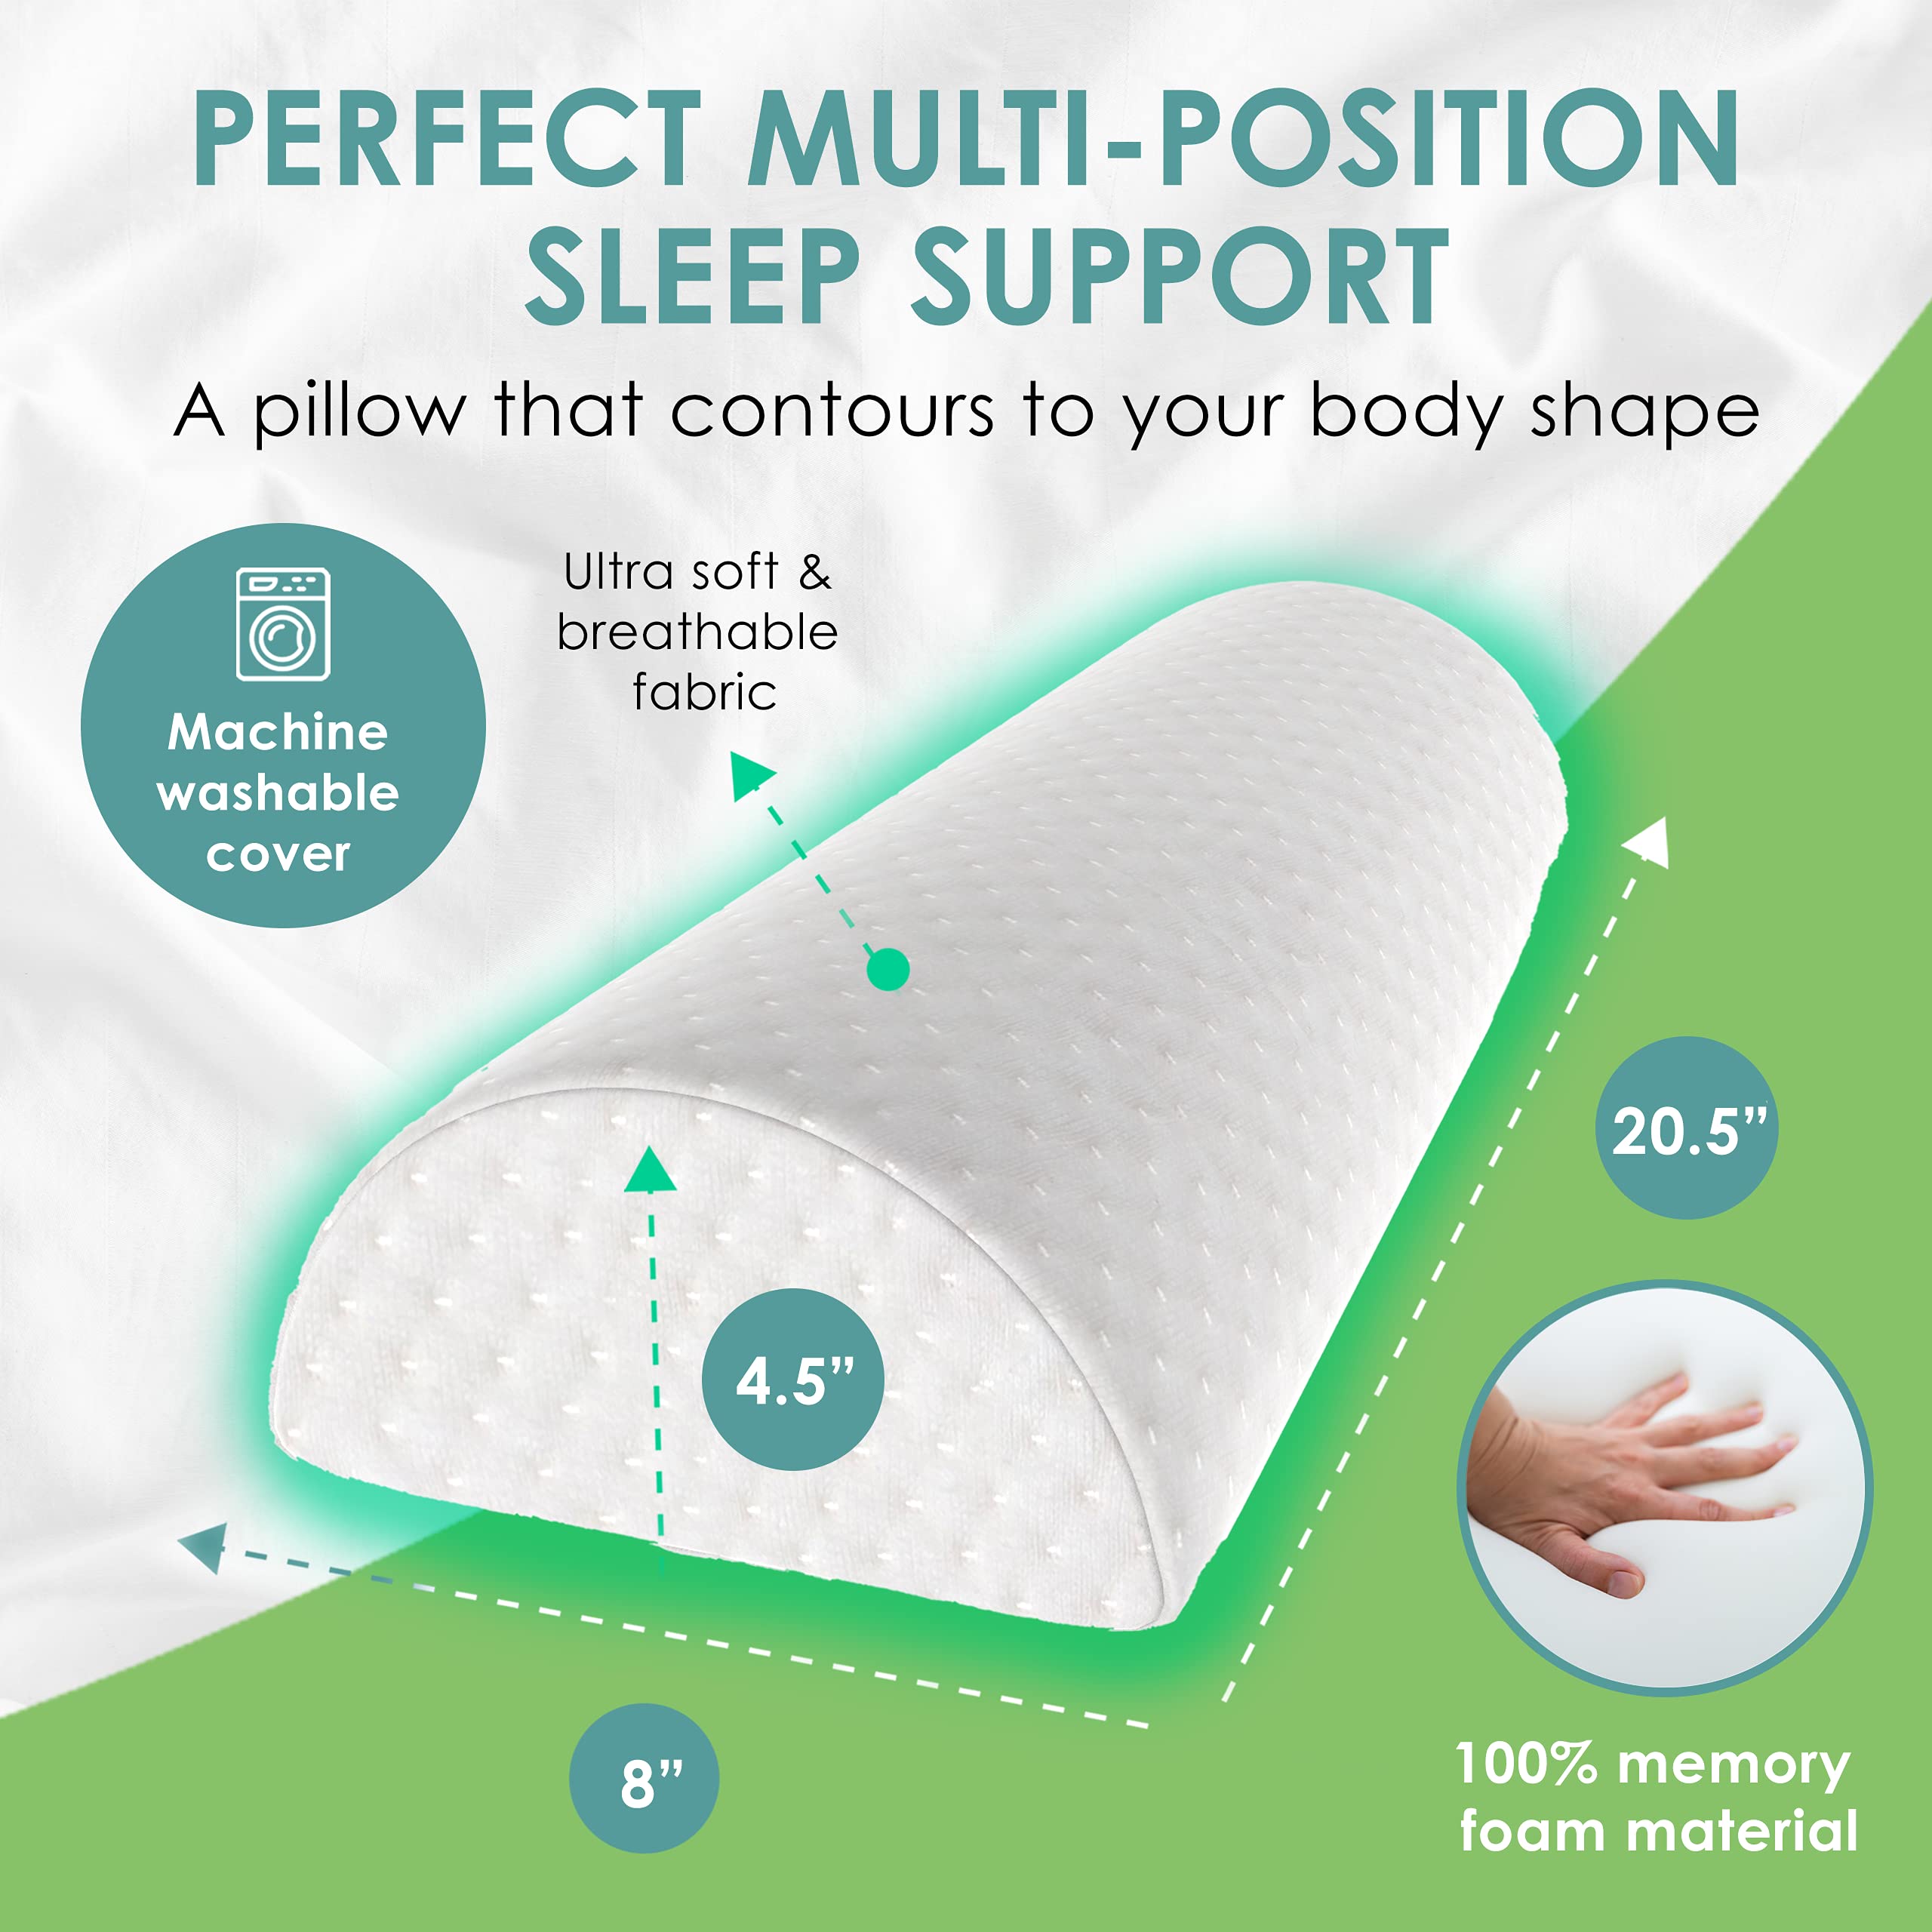 Cushy Form Bolster Pillow for Lumbar and Leg Support - 20.5 x 8 x 4.5 Inches Half Moon Memory Foam Cushion for Stomach, Back & Side Sleepers - Roll Pillows for Back and Neck w/Washable Cover